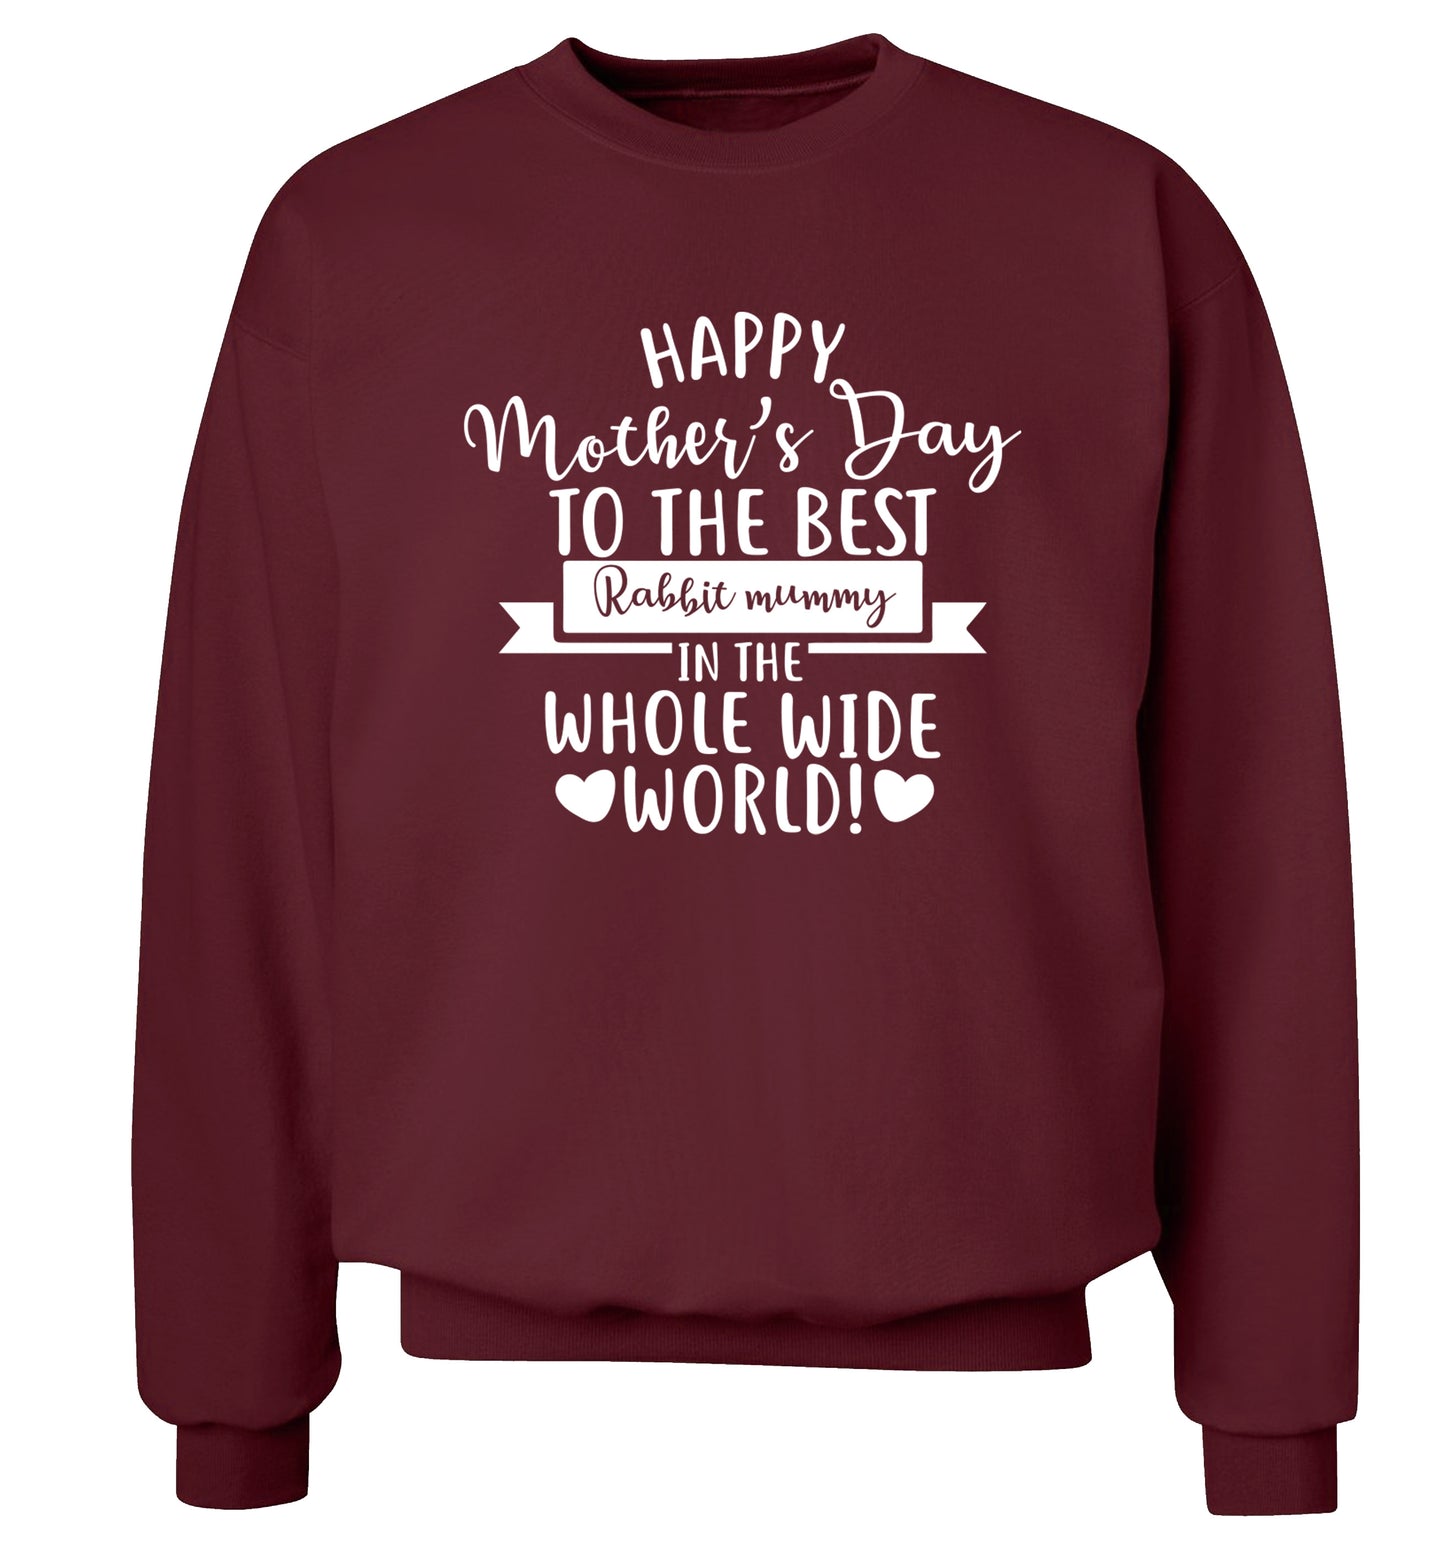 Happy mother's day to the best rabbit mummy in the world Adult's unisex maroon Sweater 2XL